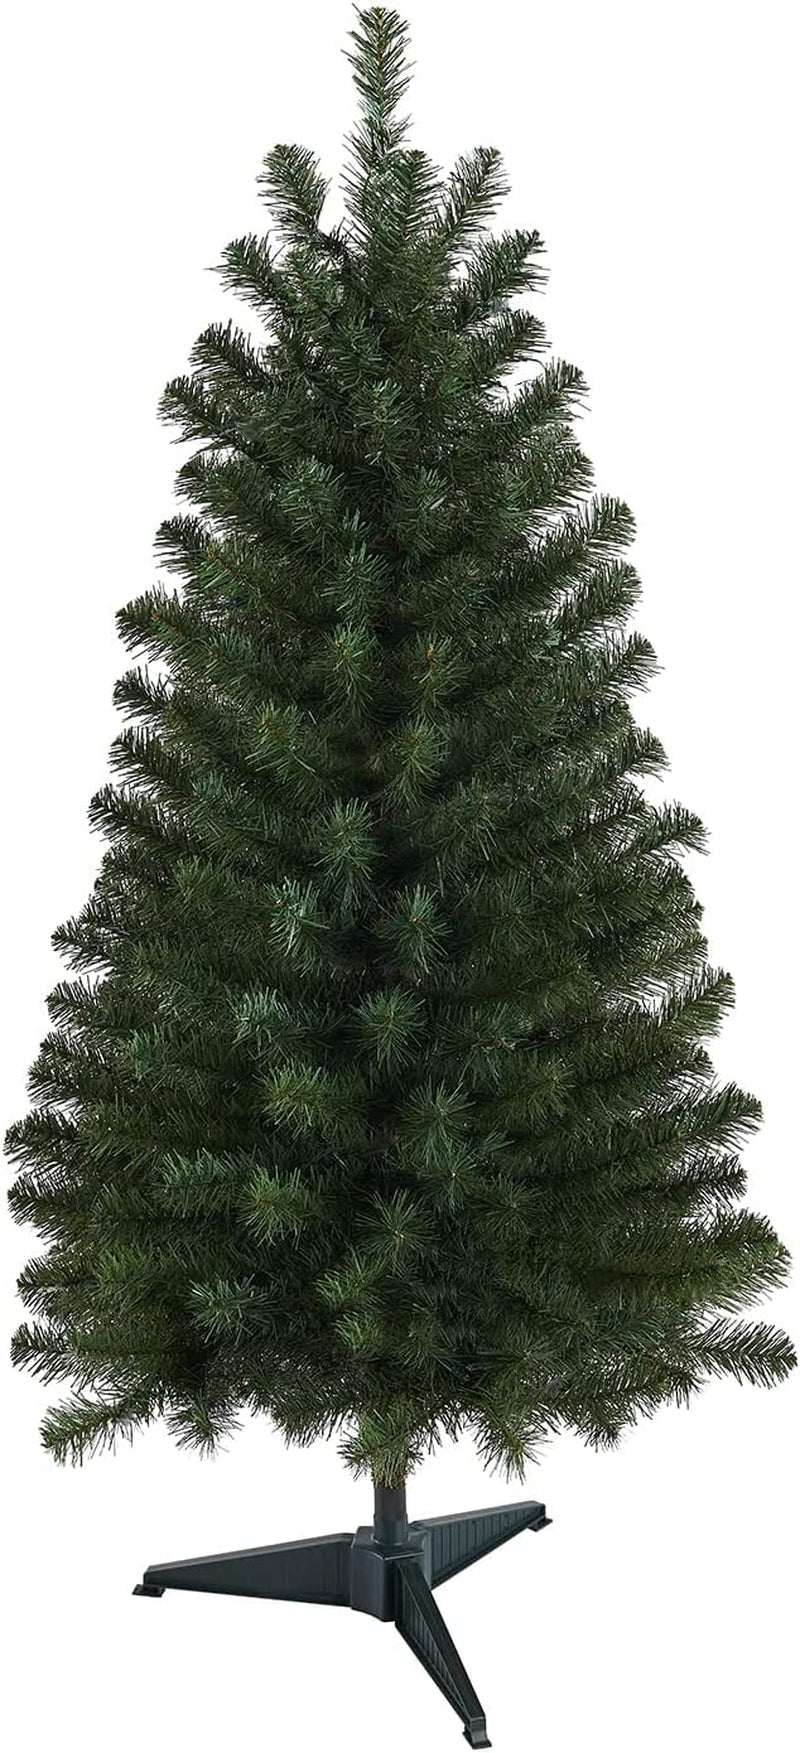 New One 6.5Ft Christmas Tree,Pre-Lit Artificial Christmas Tree with 250L Color Changing LED Lights, UL Listed Tree, Easy to Assemble Sporting Goods > Outdoor Recreation > Winter Sports & Activities Willis Electric Co Ltd 4 Feet 207 Branch Tips Unlit  